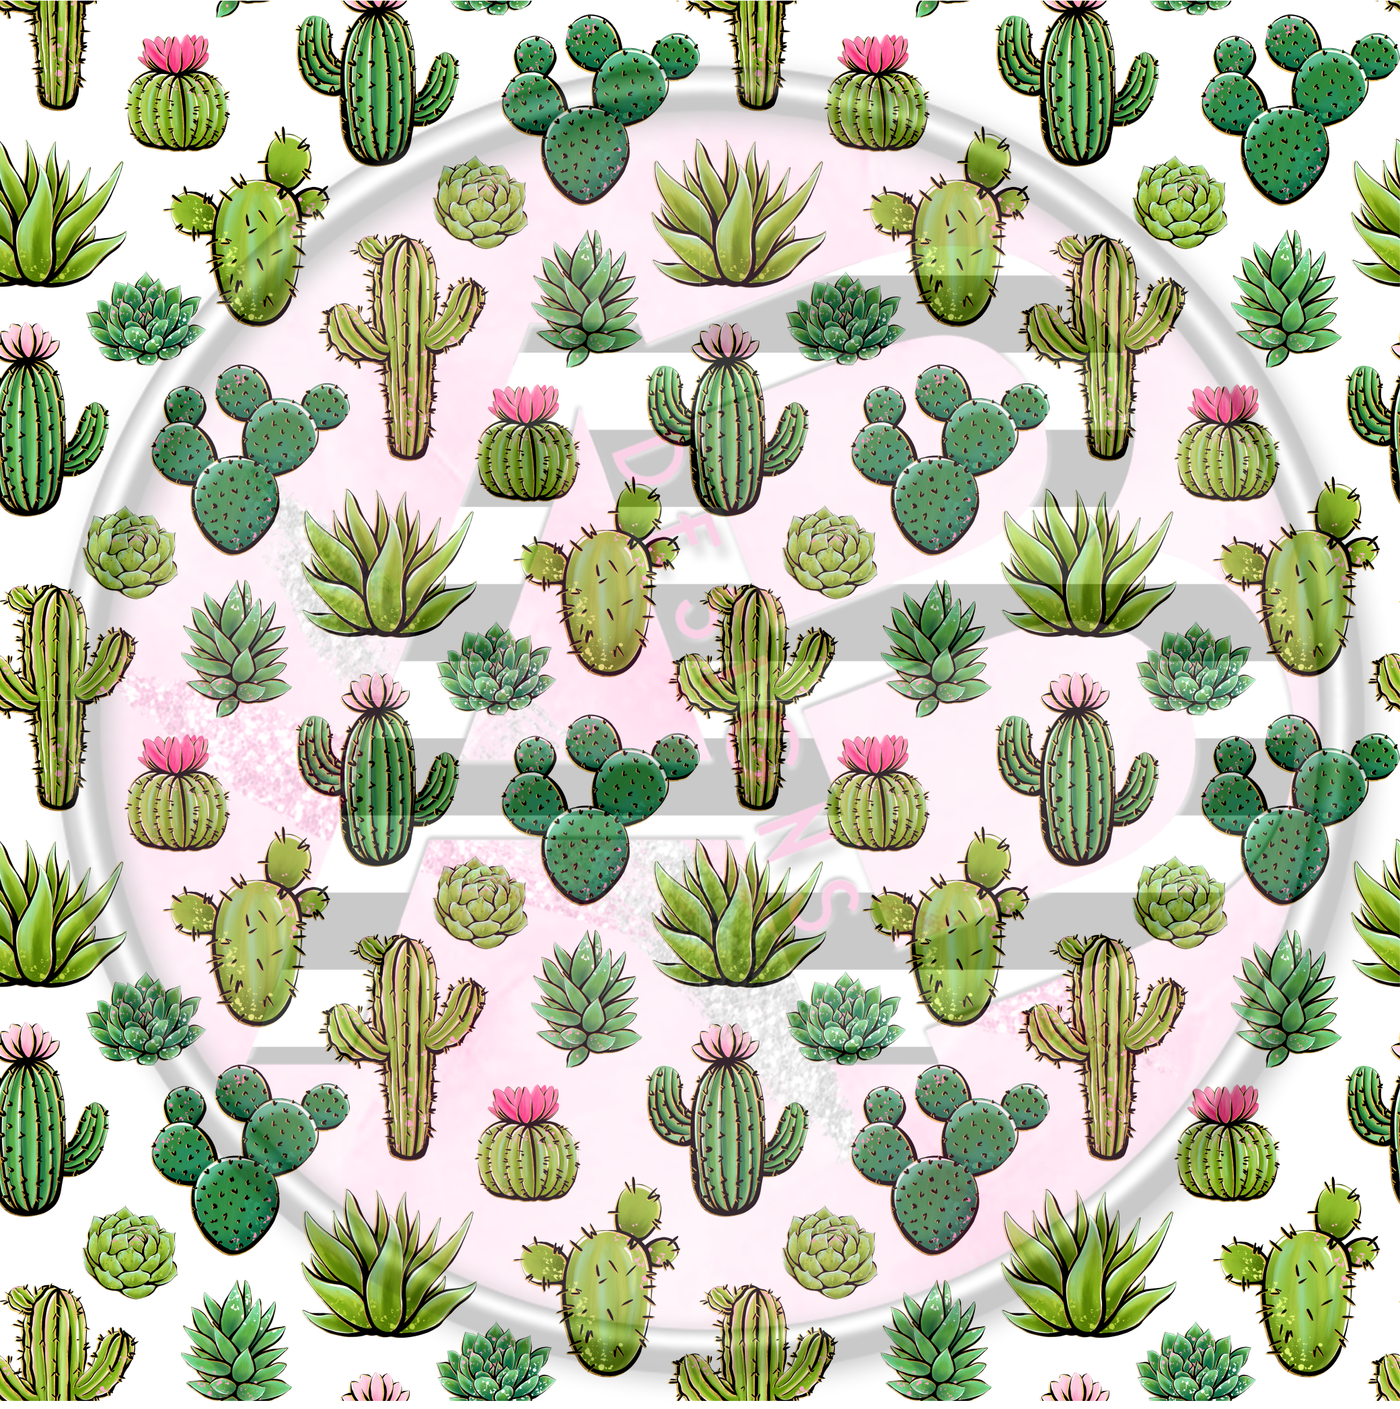 Adhesive Patterned Vinyl - Cactus 2040 Smaller